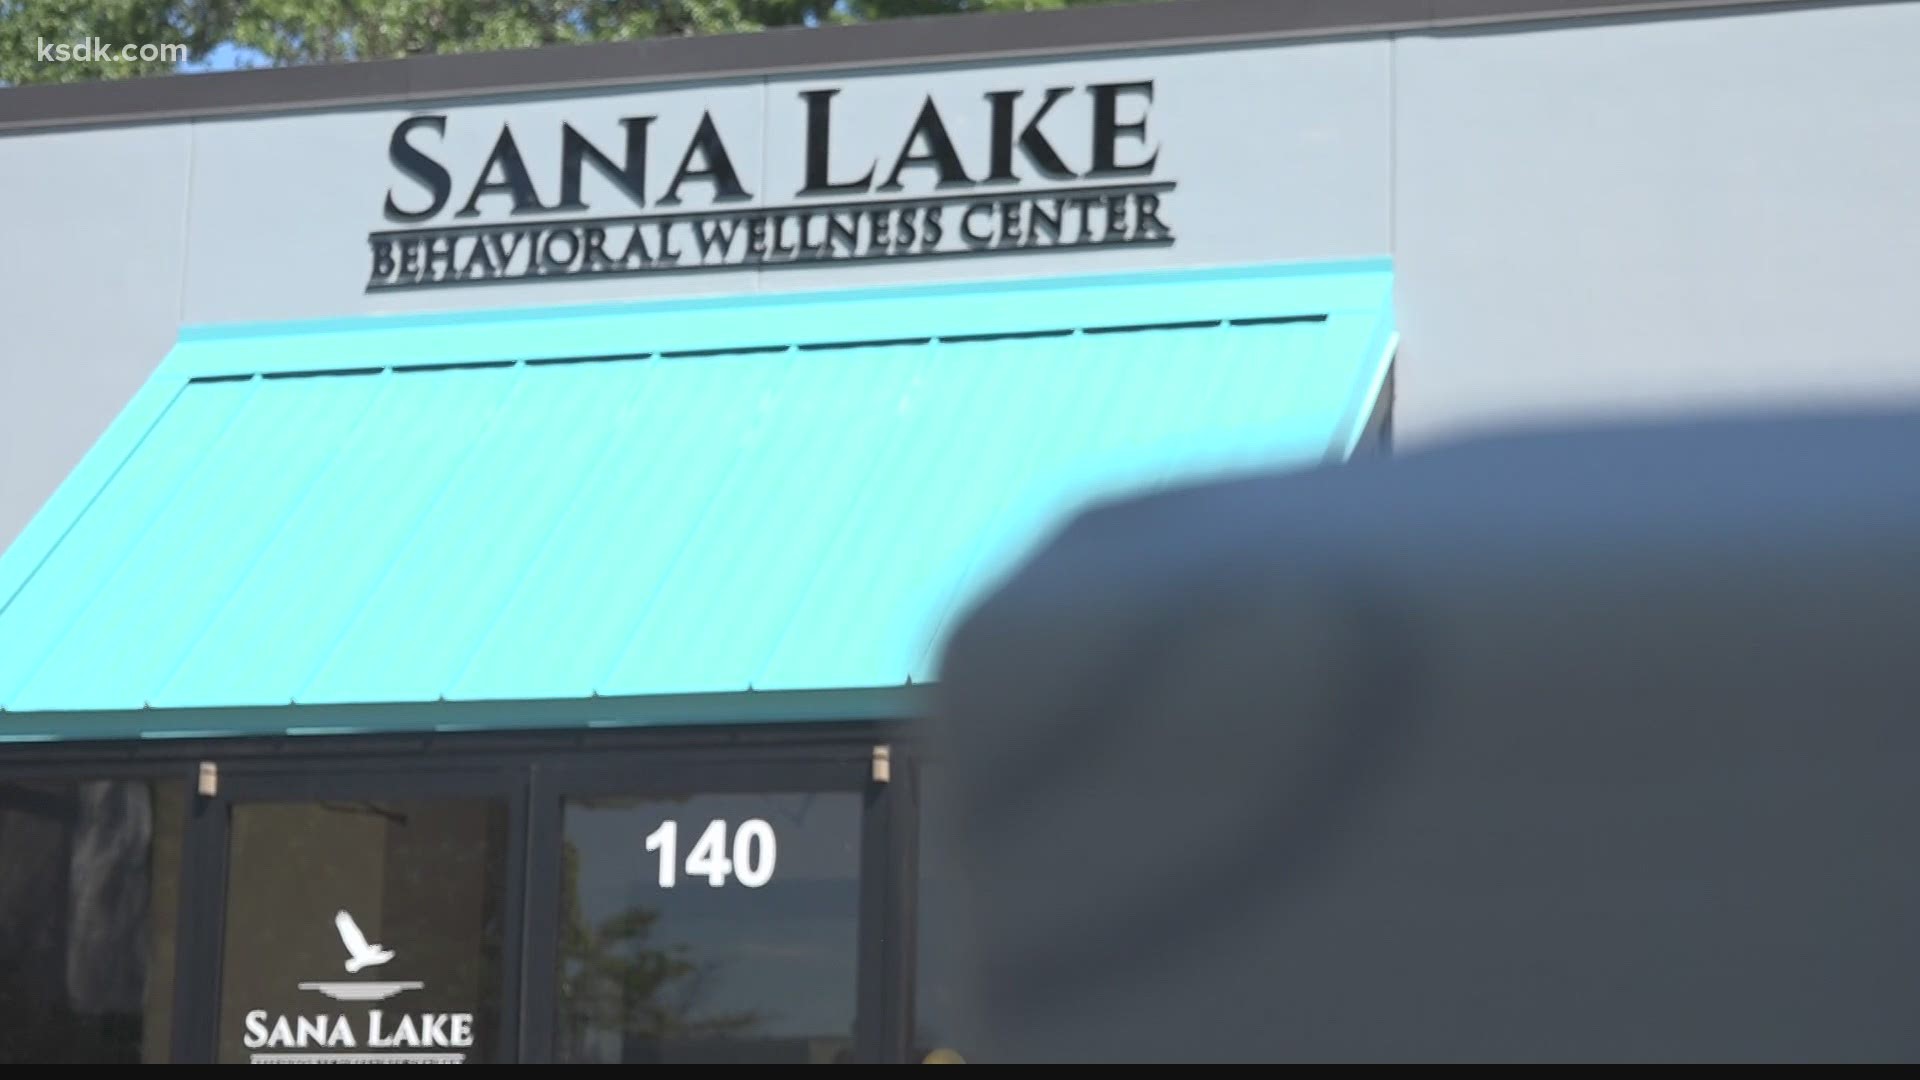 People who need help with mental health or substance abuse can sometimes wait upwards of two months to see a psychiatrist. Sana Lake looks to reduce that wait.